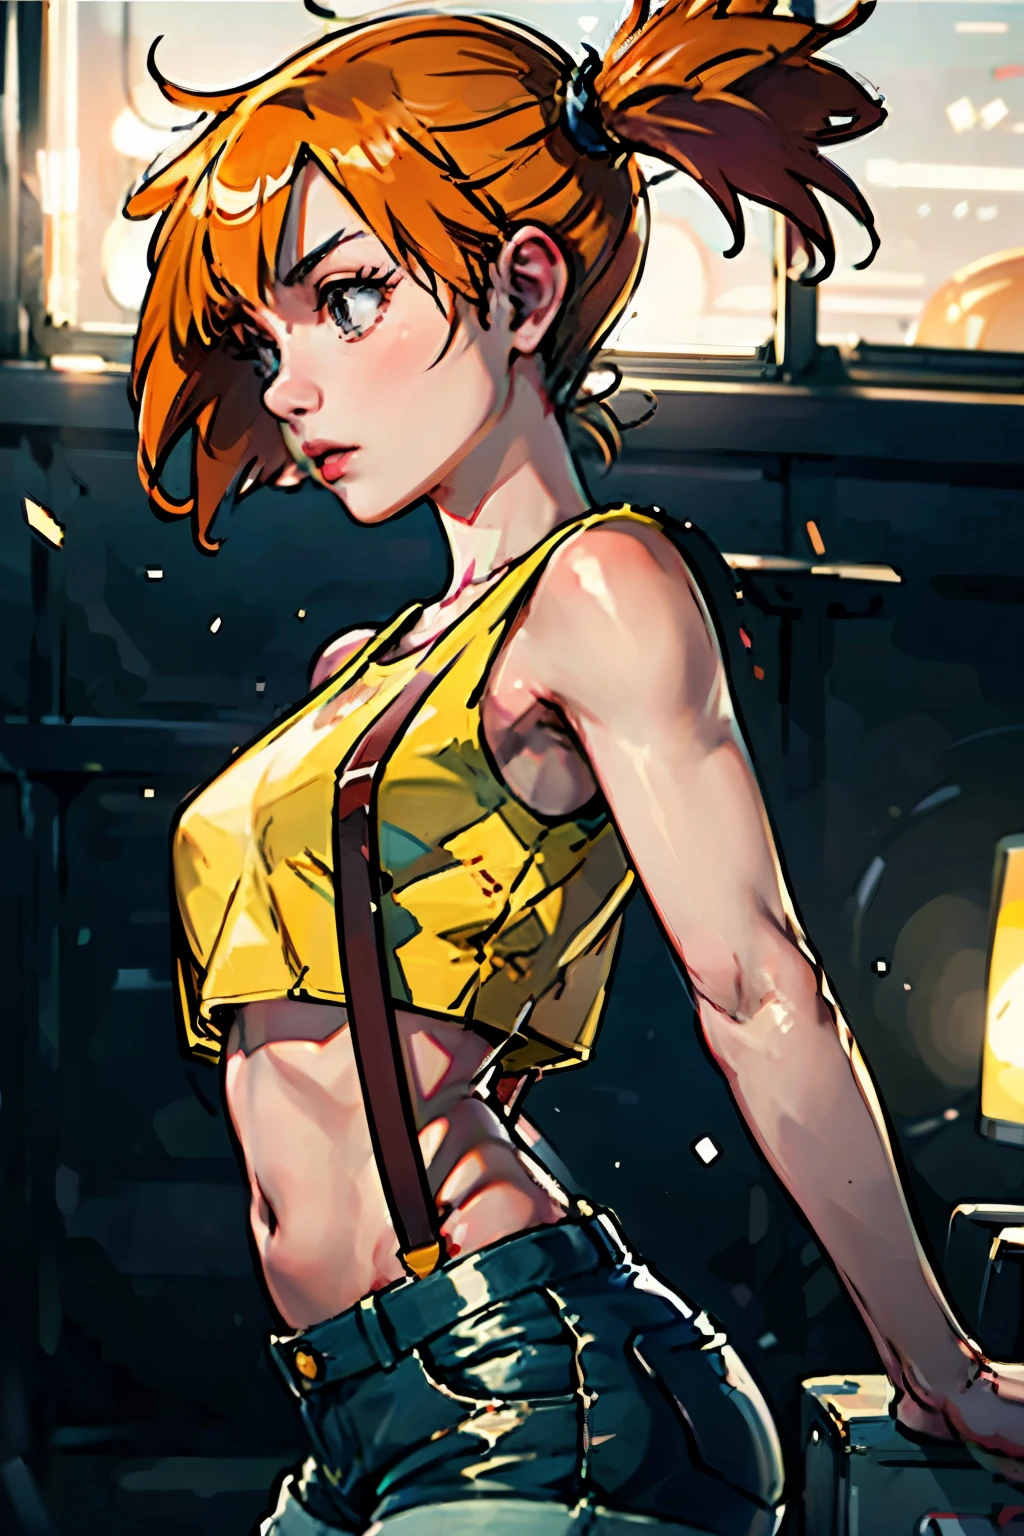 Misty_Pokemon, yellow crop top, suspenders, side ponytail, orange hair, denim shorts, stretching pose, from the side picture, cinematic light, hot posture, perfect body